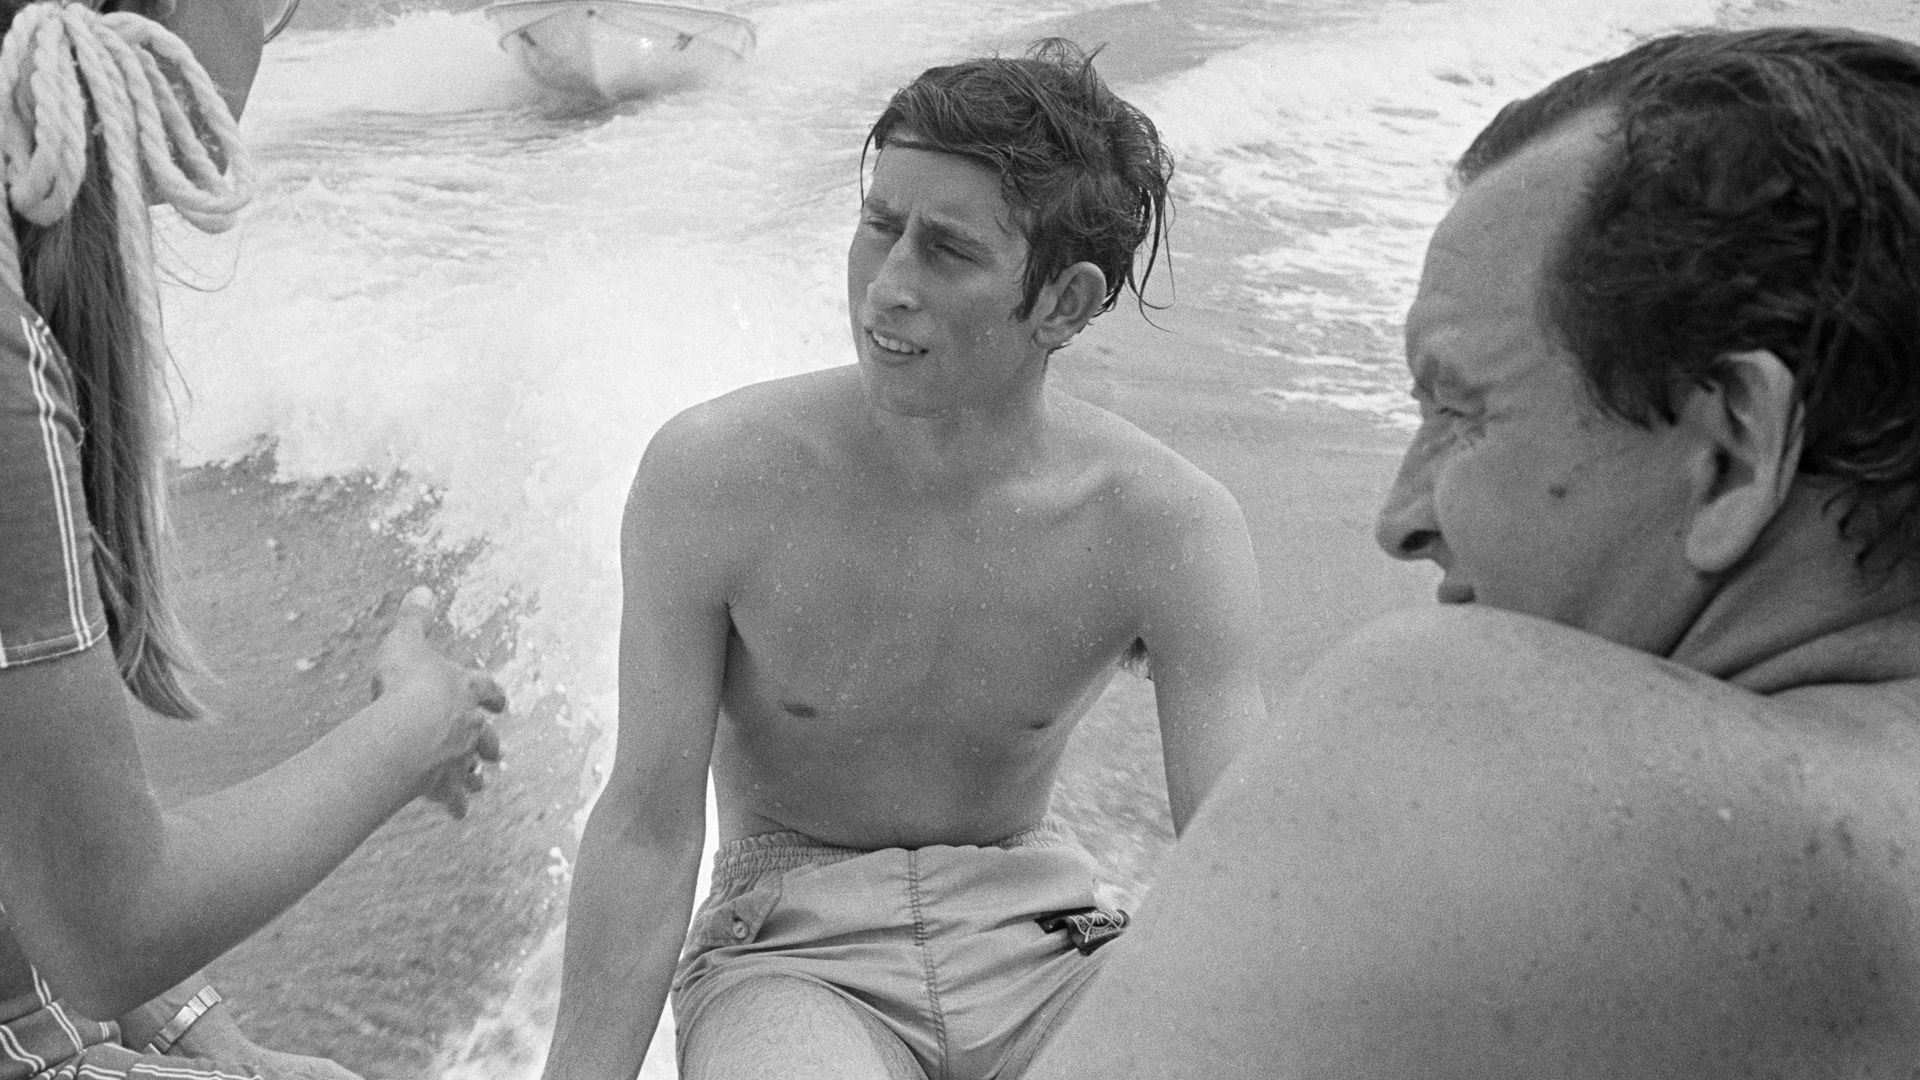 Prince Charles, Prince of Wales, on holiday in Barbados, October 1970